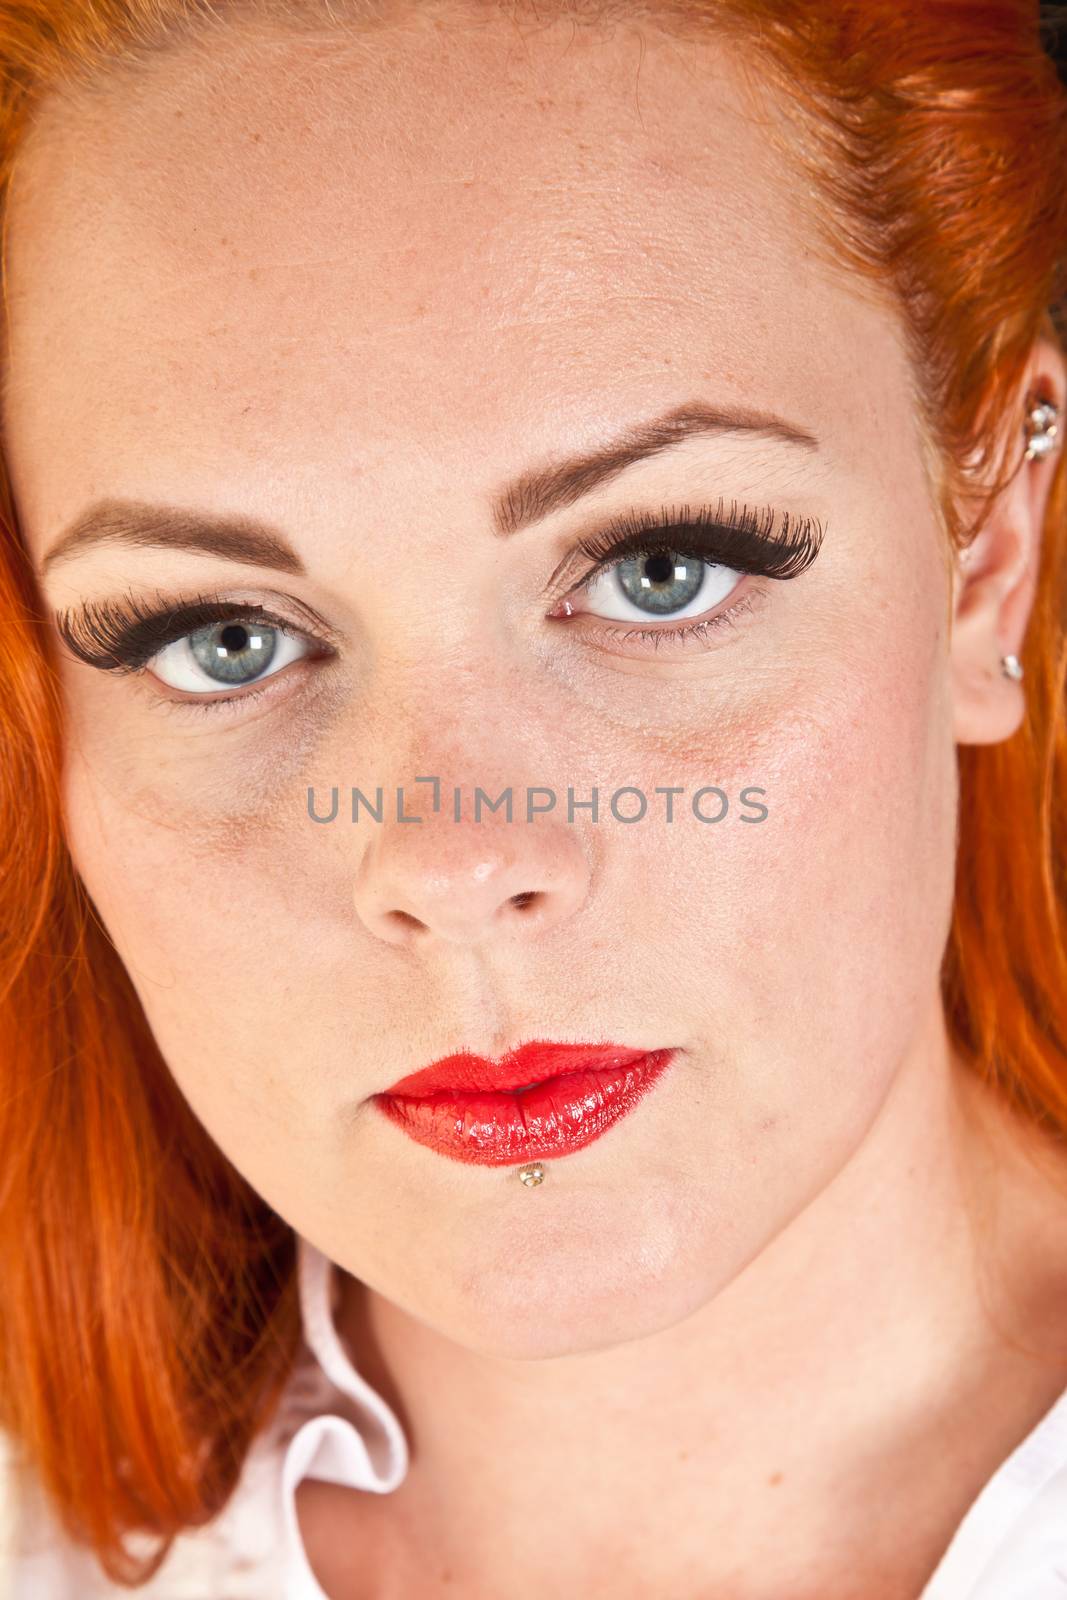 Red hair girl in pin-up style portrait